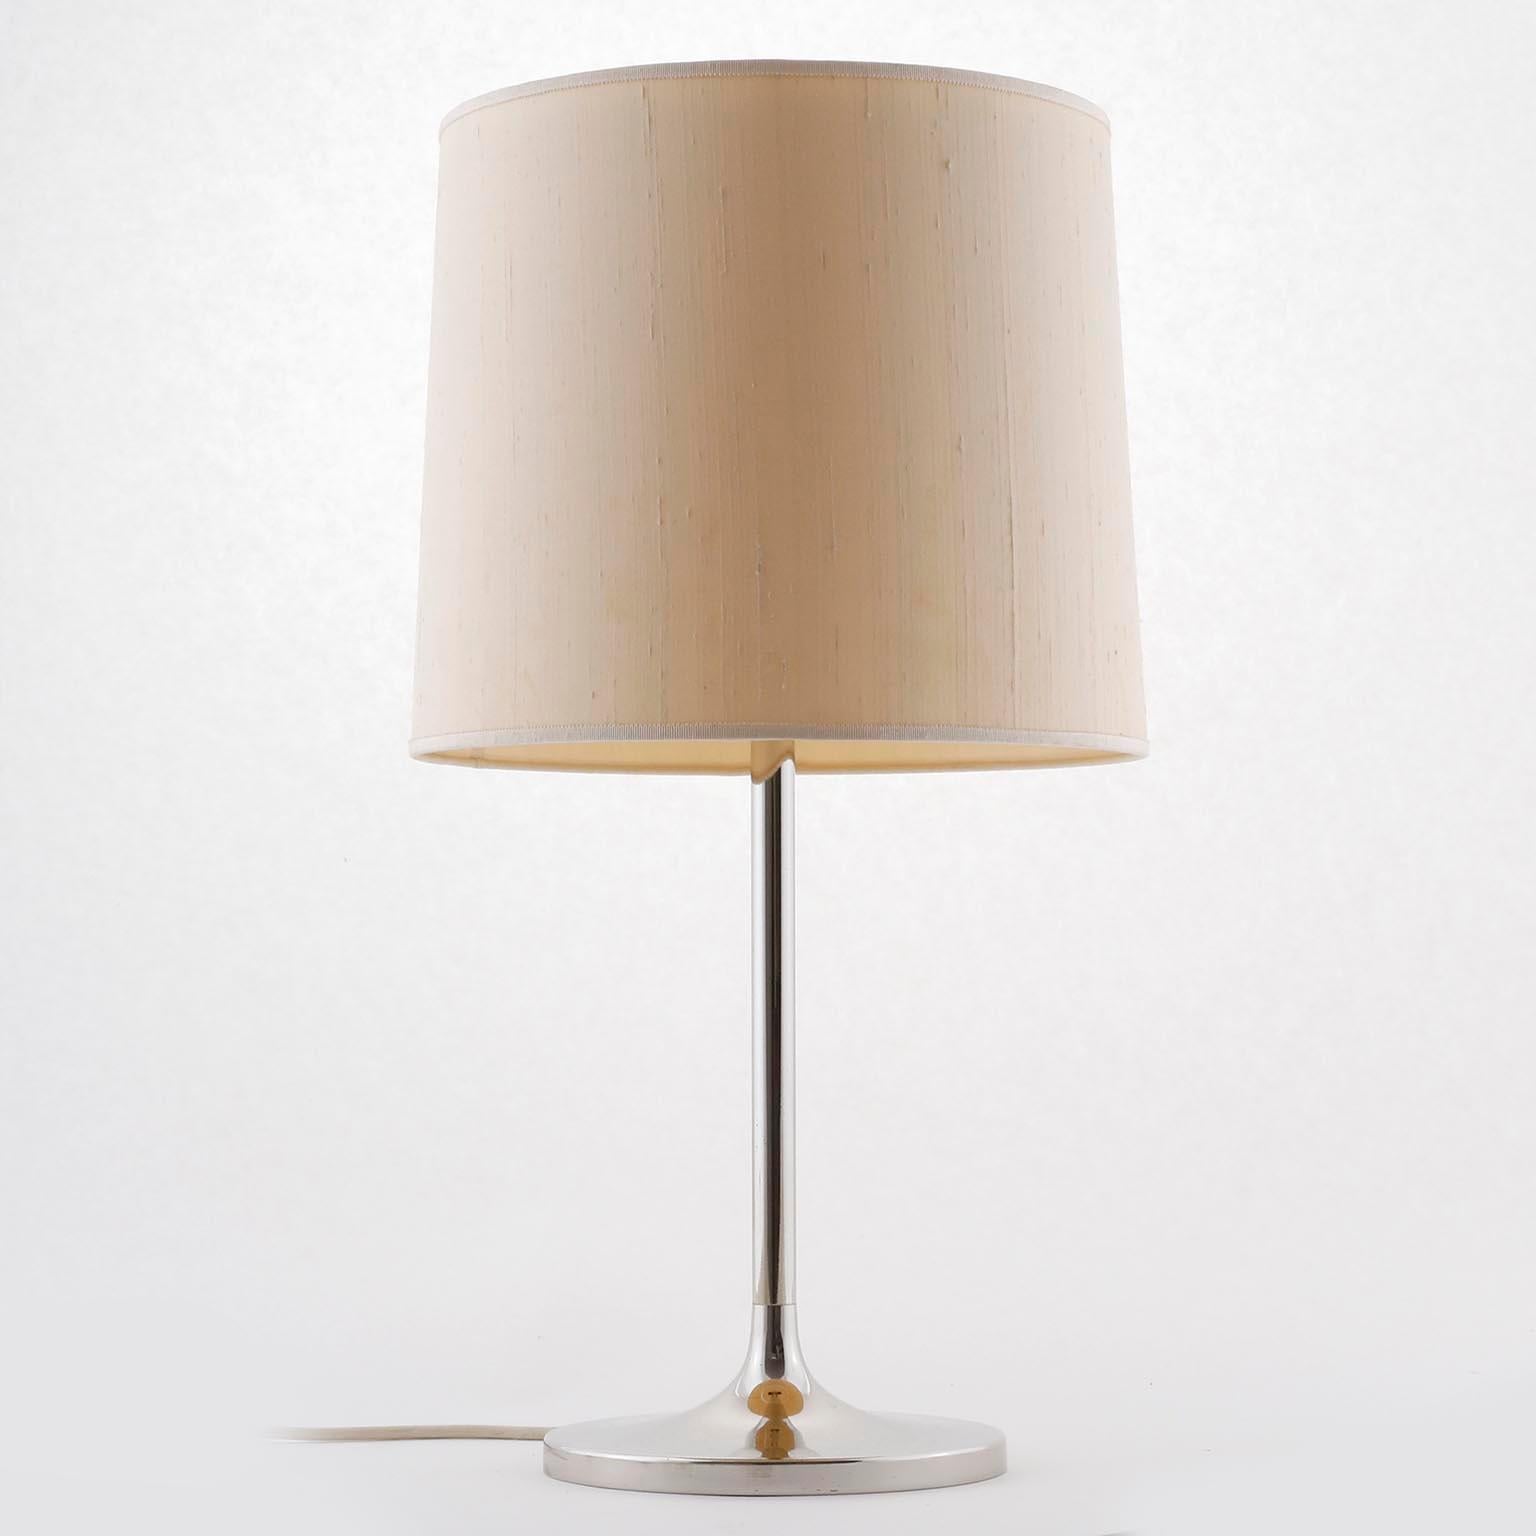 Pair of Kalmar Table Lamps with Tulip Base, Polished Nickel, Beige Shade, 1970 In Good Condition For Sale In Hausmannstätten, AT